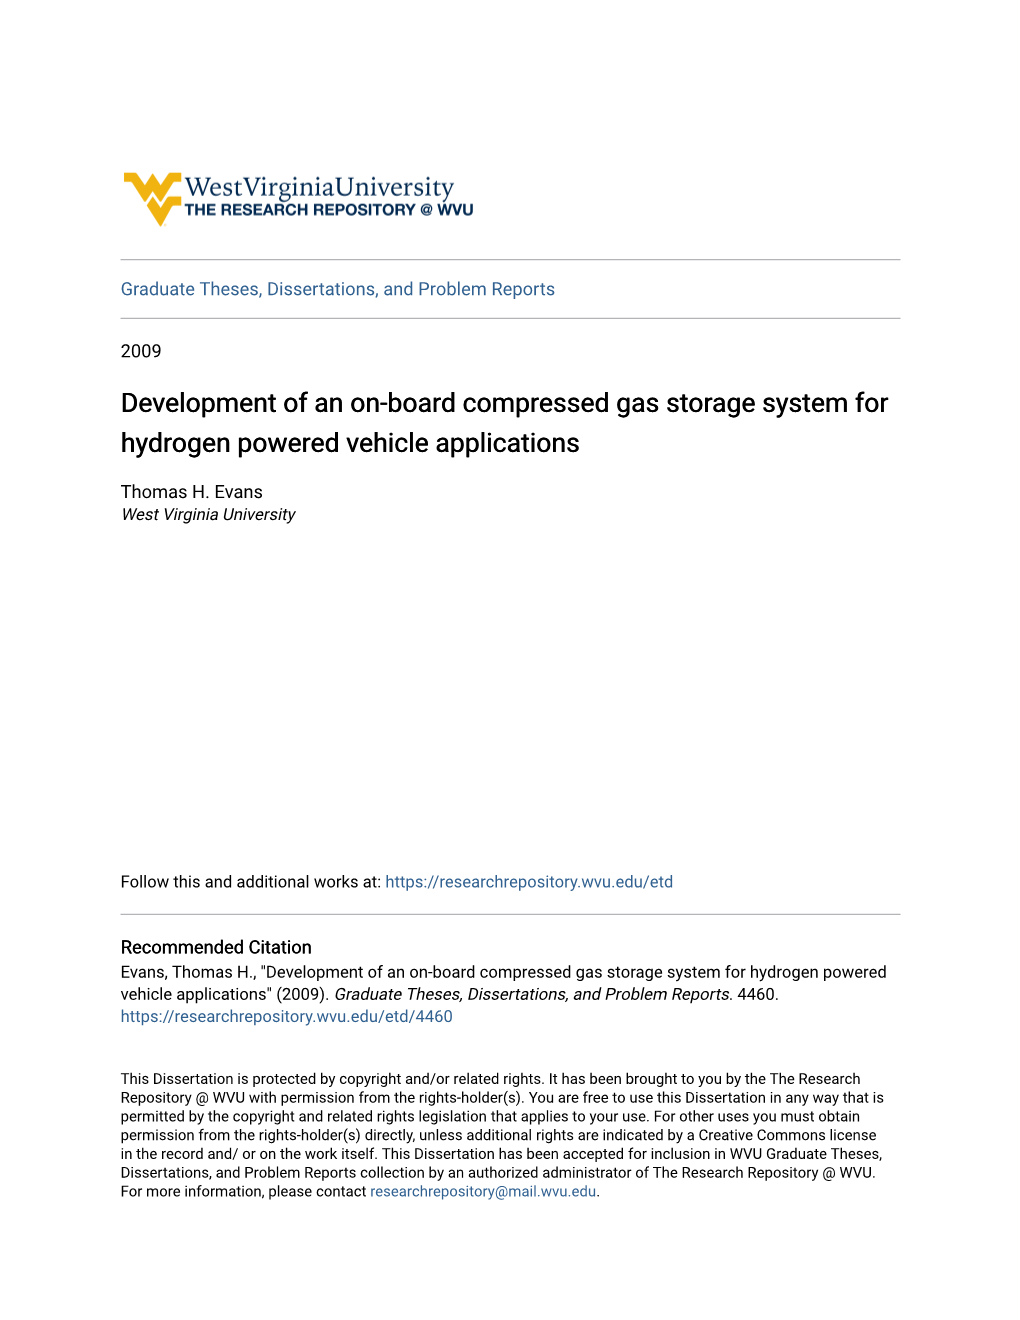 Development of an On-Board Compressed Gas Storage System for Hydrogen Powered Vehicle Applications